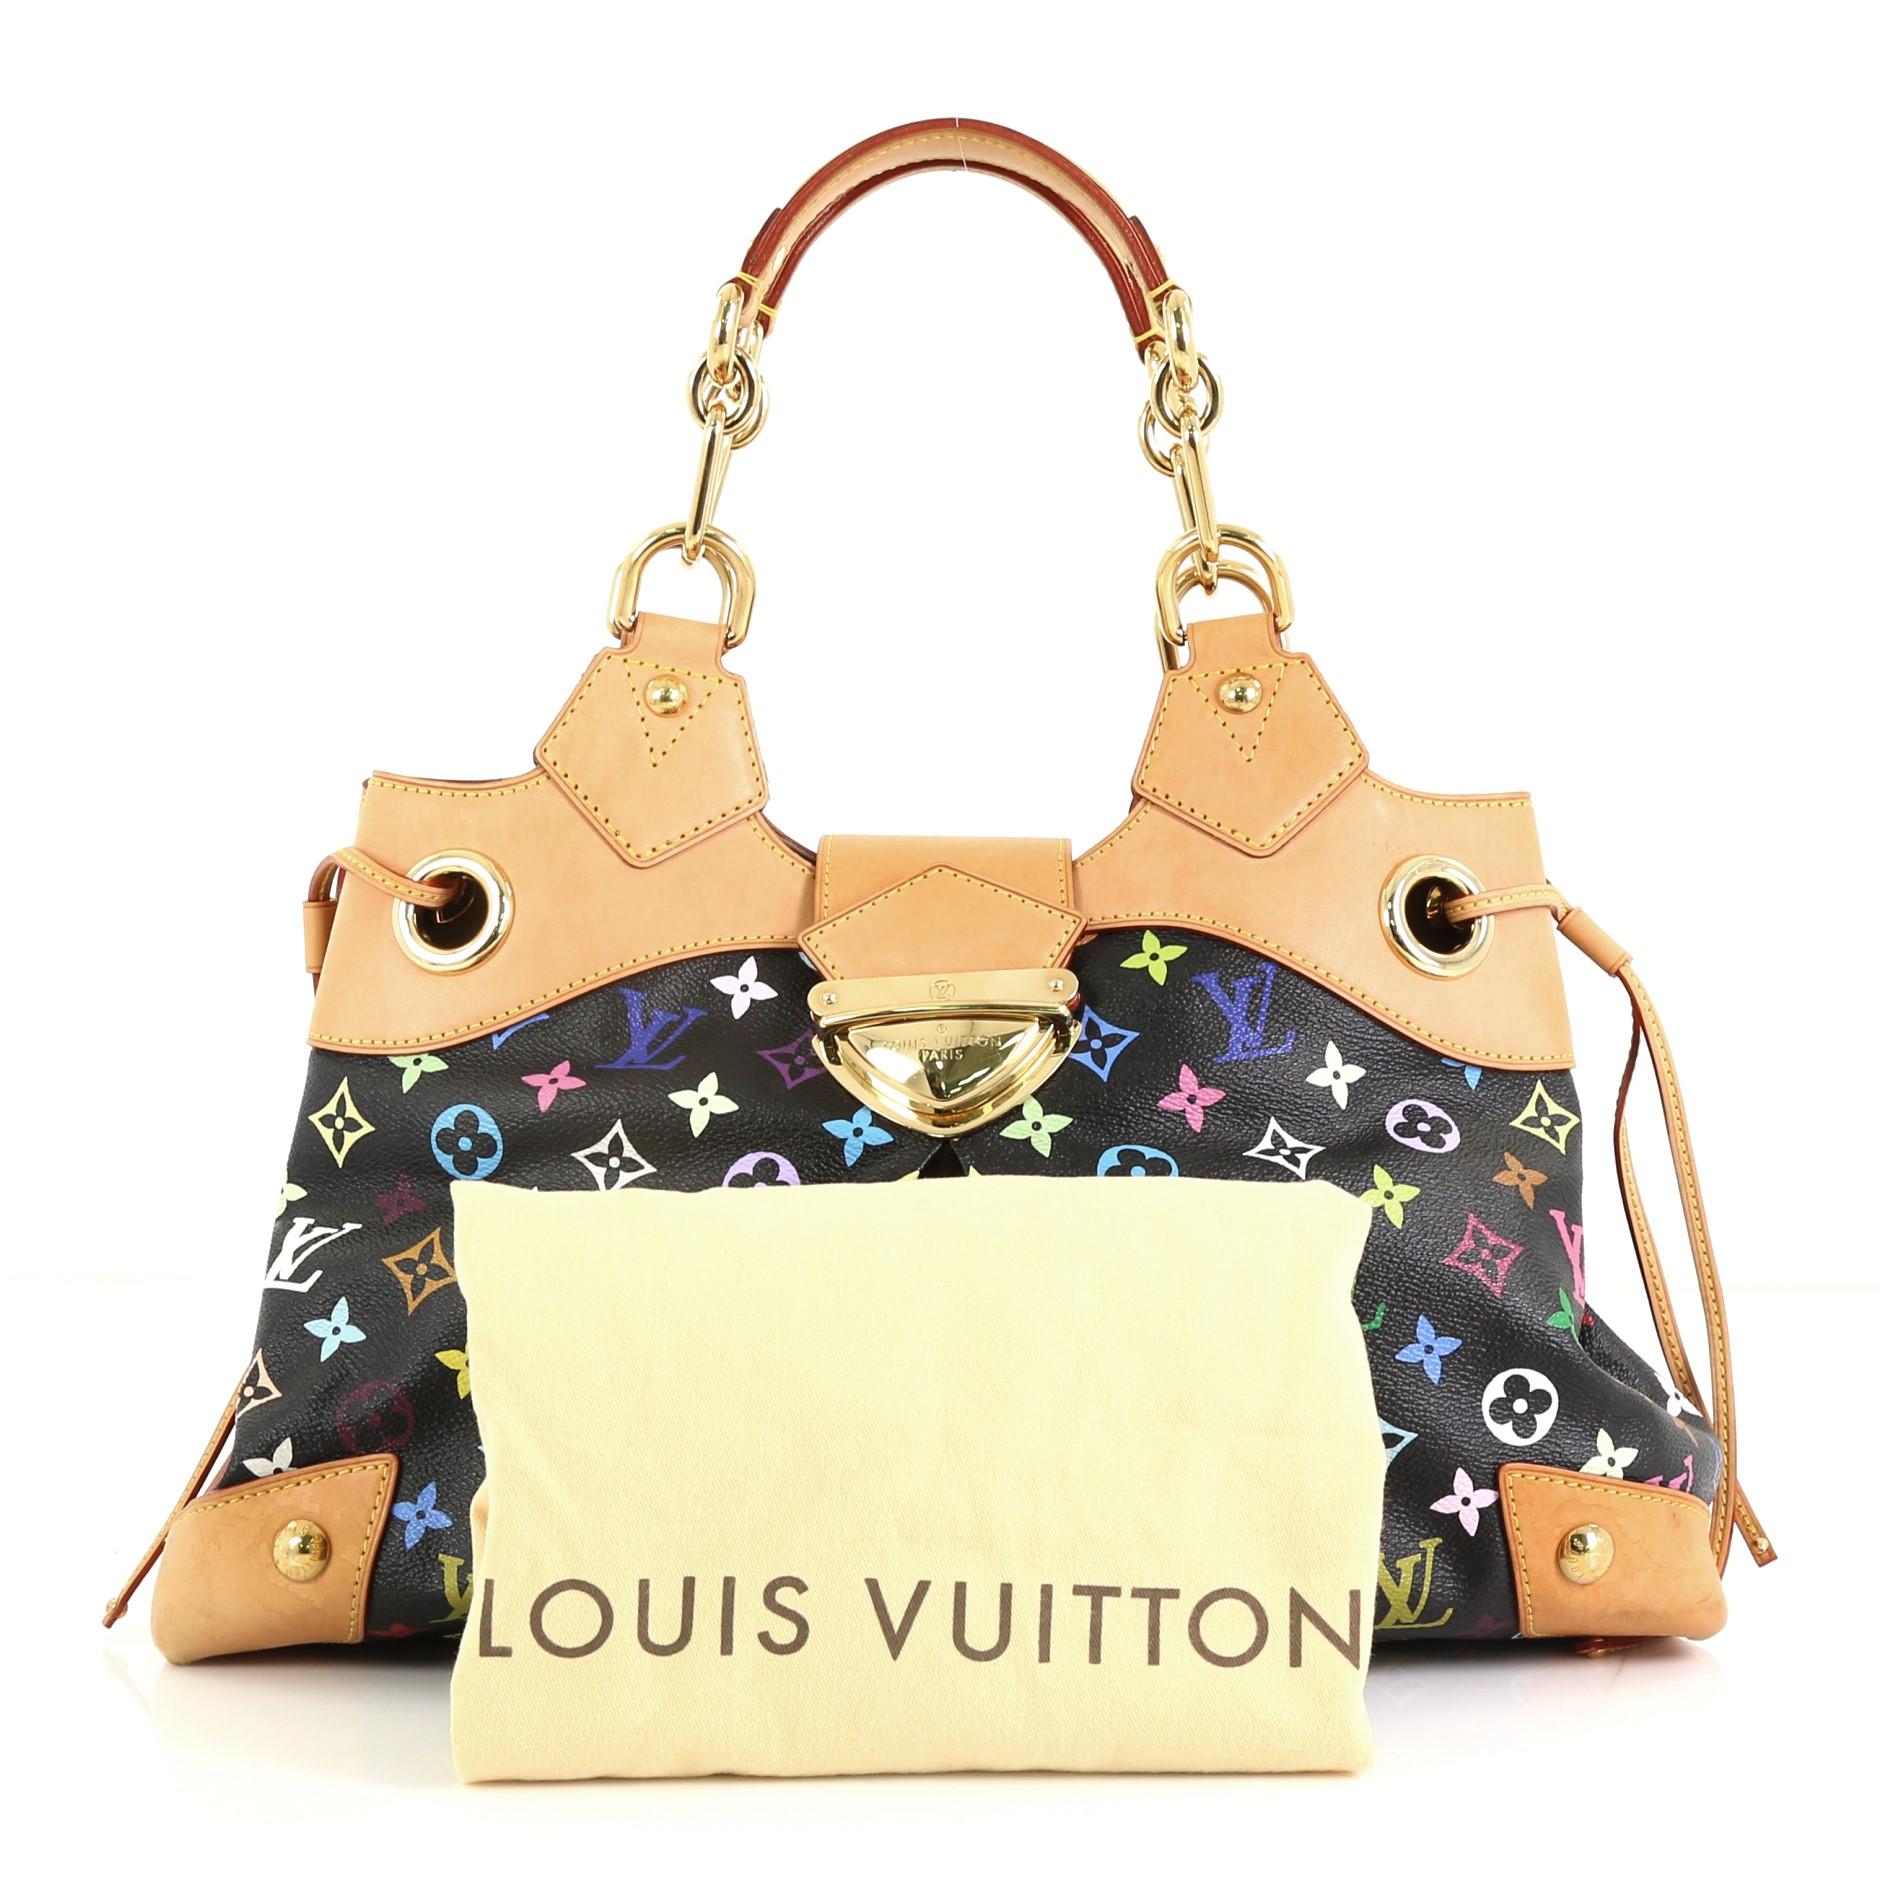 This Louis Vuitton Ursula Handbag Monogram Multicolor, crafted in black monogram multicolor monogram coated canvas, features chain handles with leather pads, side drawstring closures, and gold-tone hardware. Its push-lock closure opens to a neutral